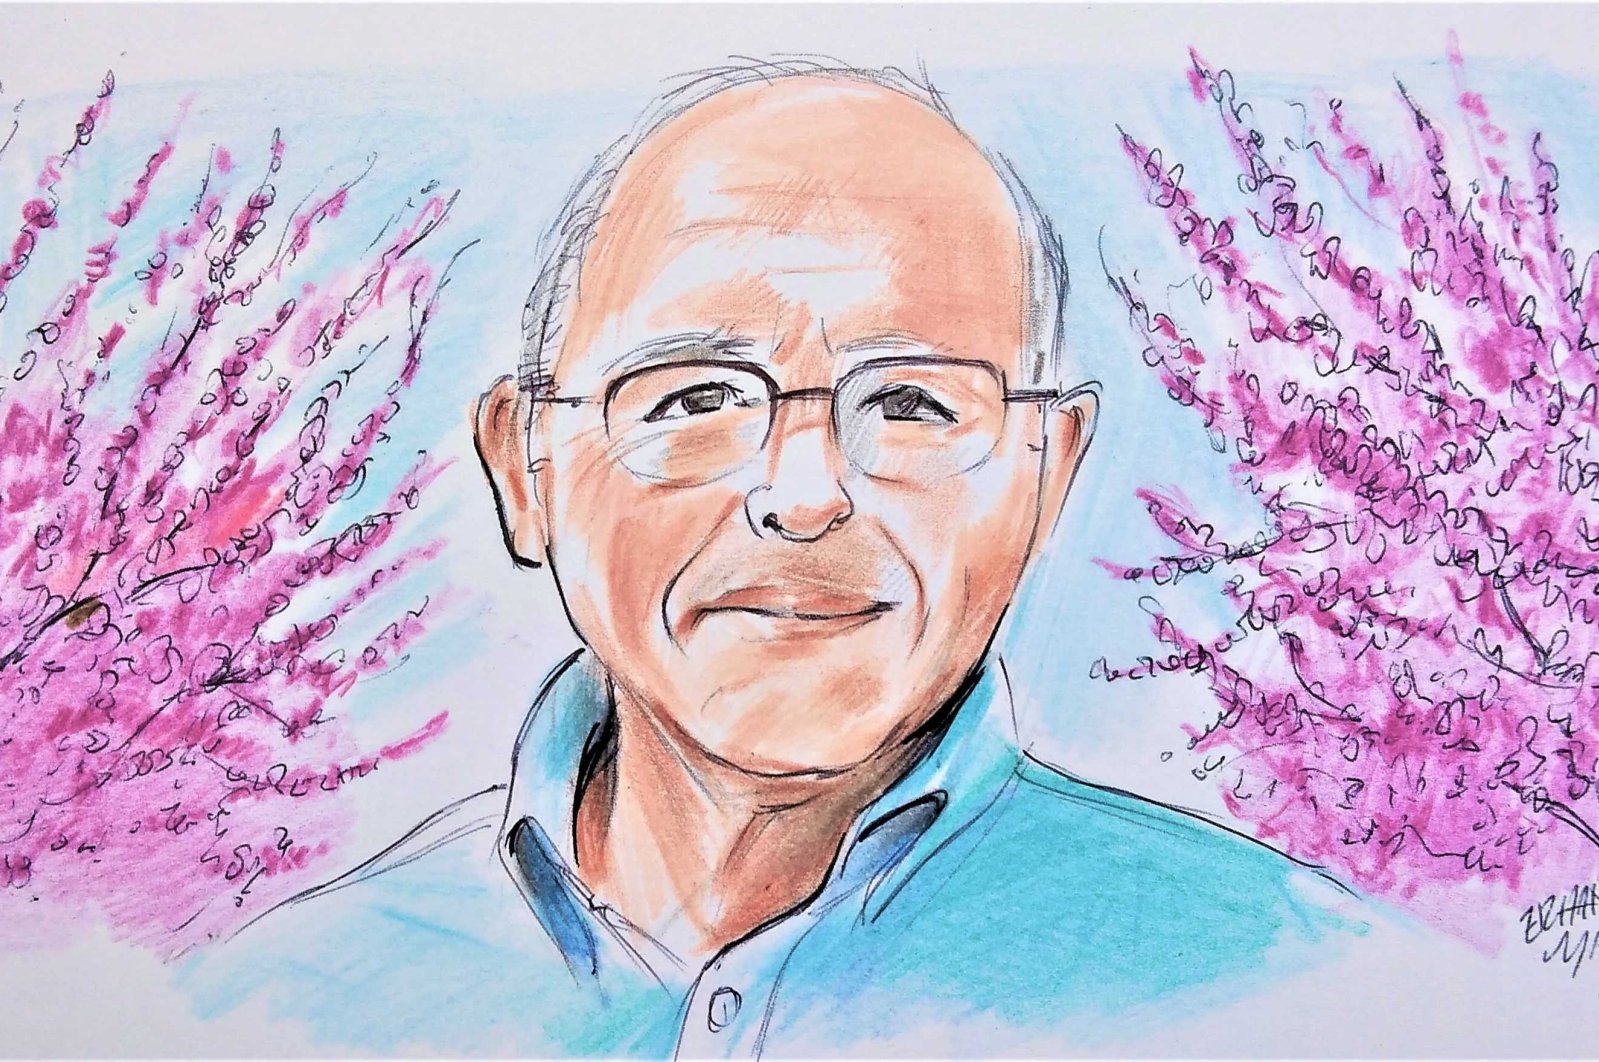 Illustration by Erhan Yalvaç of Ahmet Haluk Dursun with Judas trees in the background.